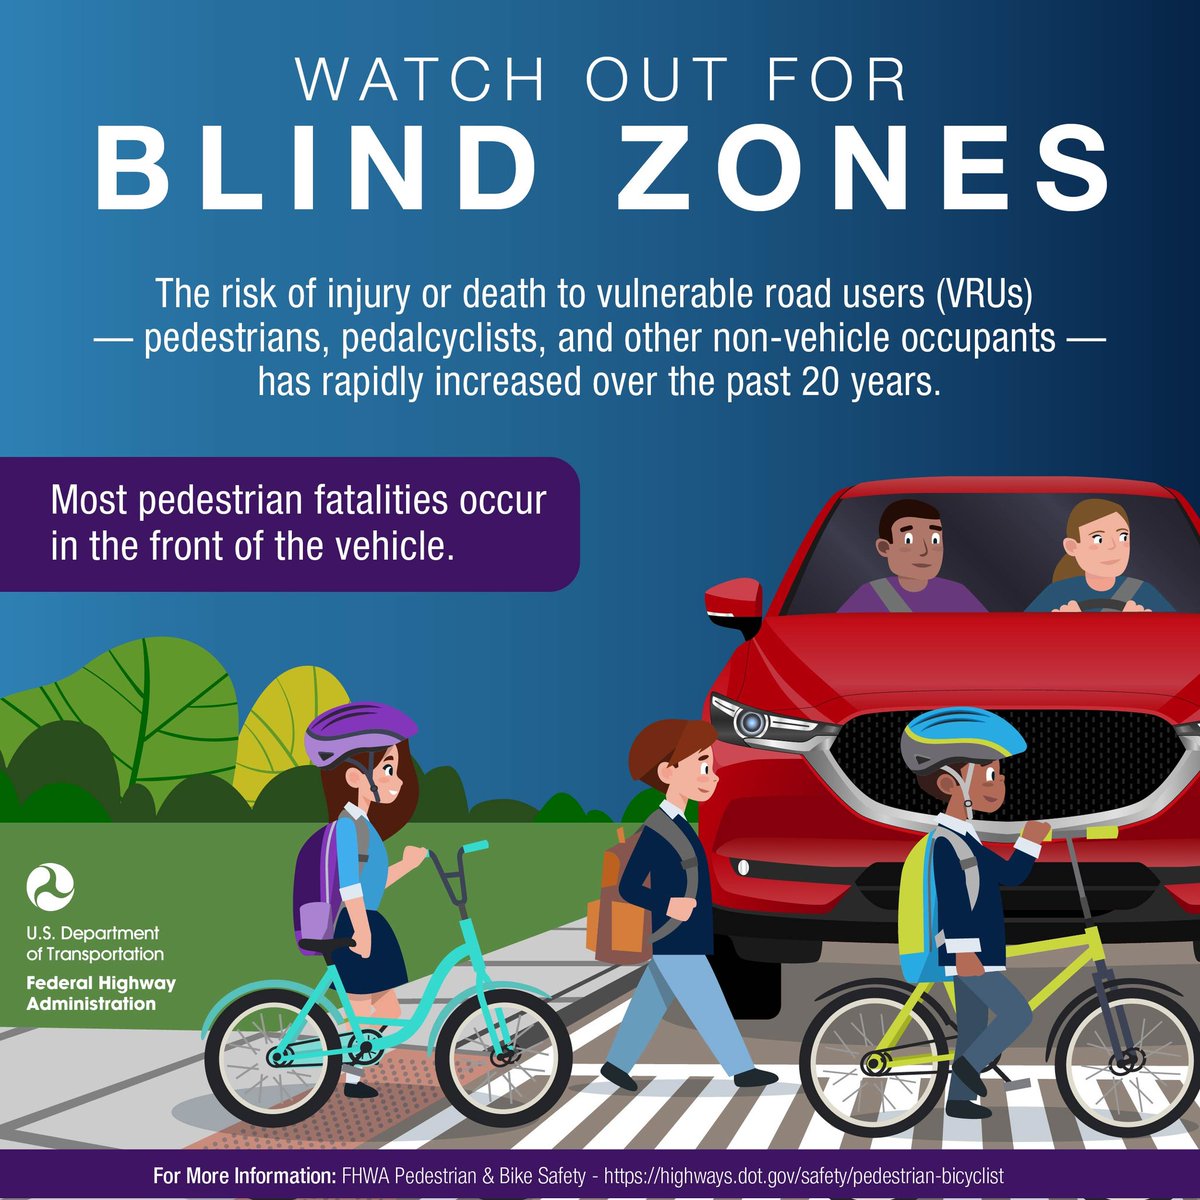 🚶‍♀️🚸🚴‍♀️Today is National Walk, Bike & Roll to School Day. Today—and every day—please watch out for blind zones. Most pedestrian and cyclist accidents occur in front of vehicles. highways.dot.gov/safety/pedestr…
@BellGardens_PD #BikeAndRollToSchoolDay #NationalBikeMonth